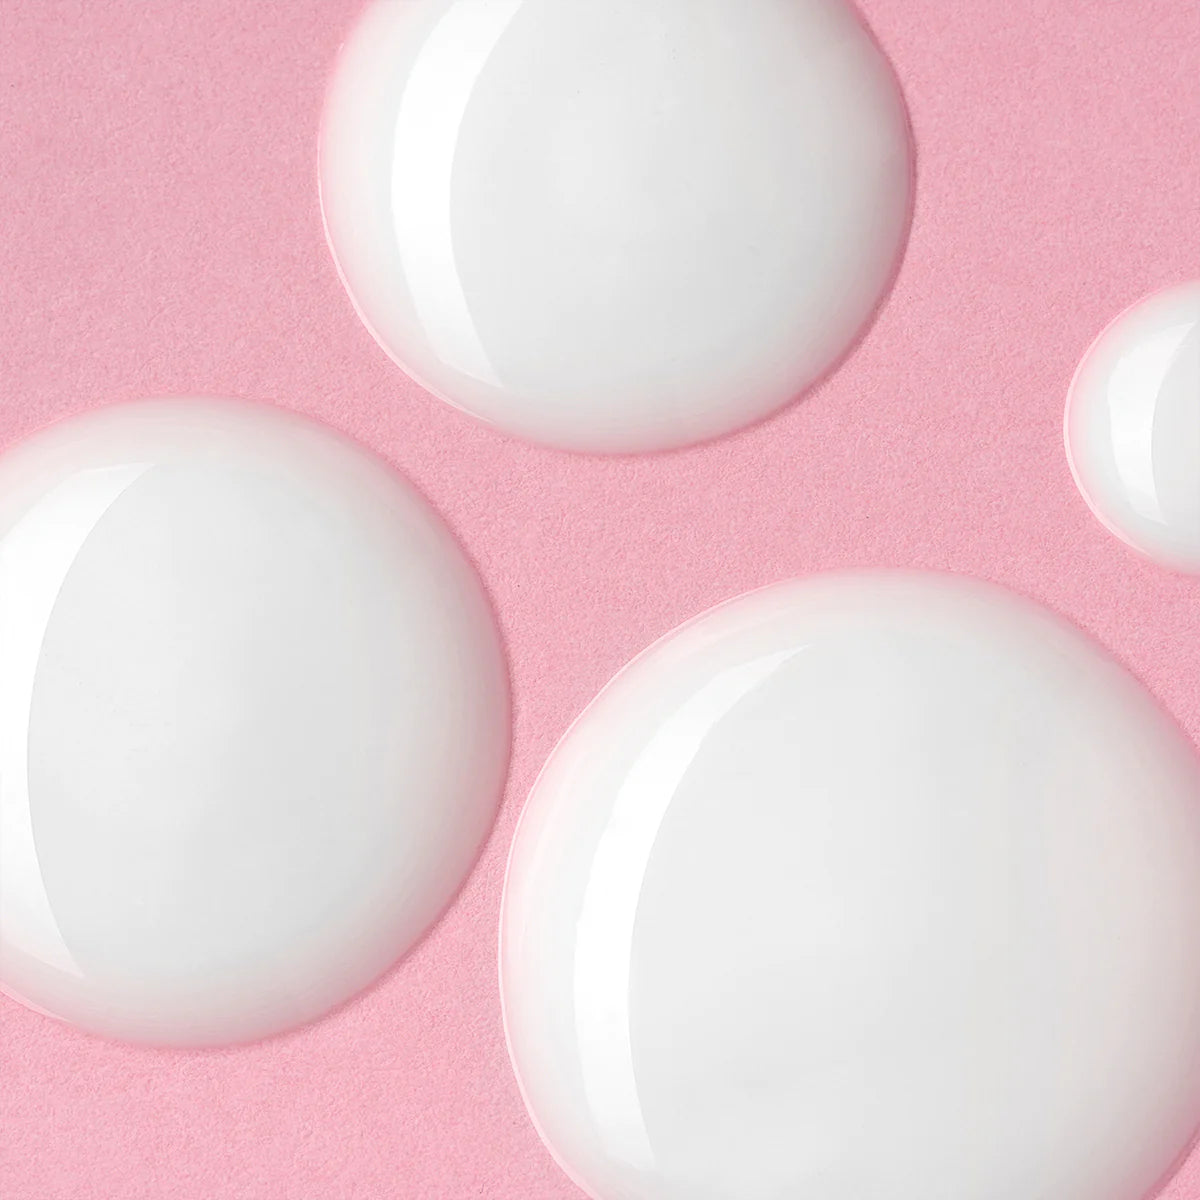 A group of white circles on a pink background, resembling Iridescent Light Serum Luminous Rose drops for the skin.